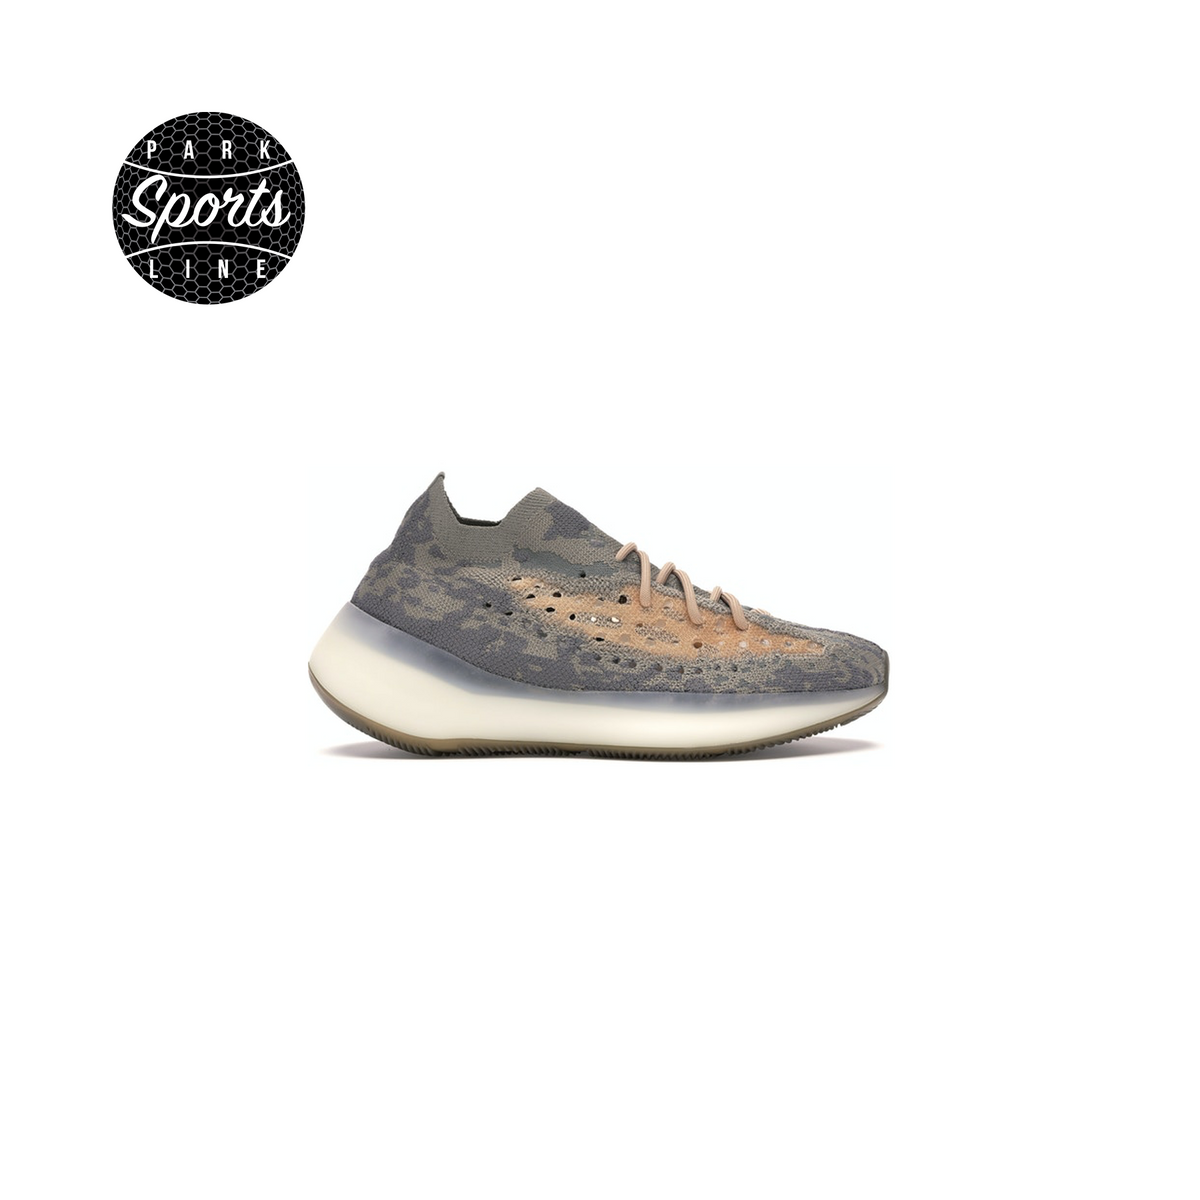 Yeezy Boost 380 – Parks Sports Line